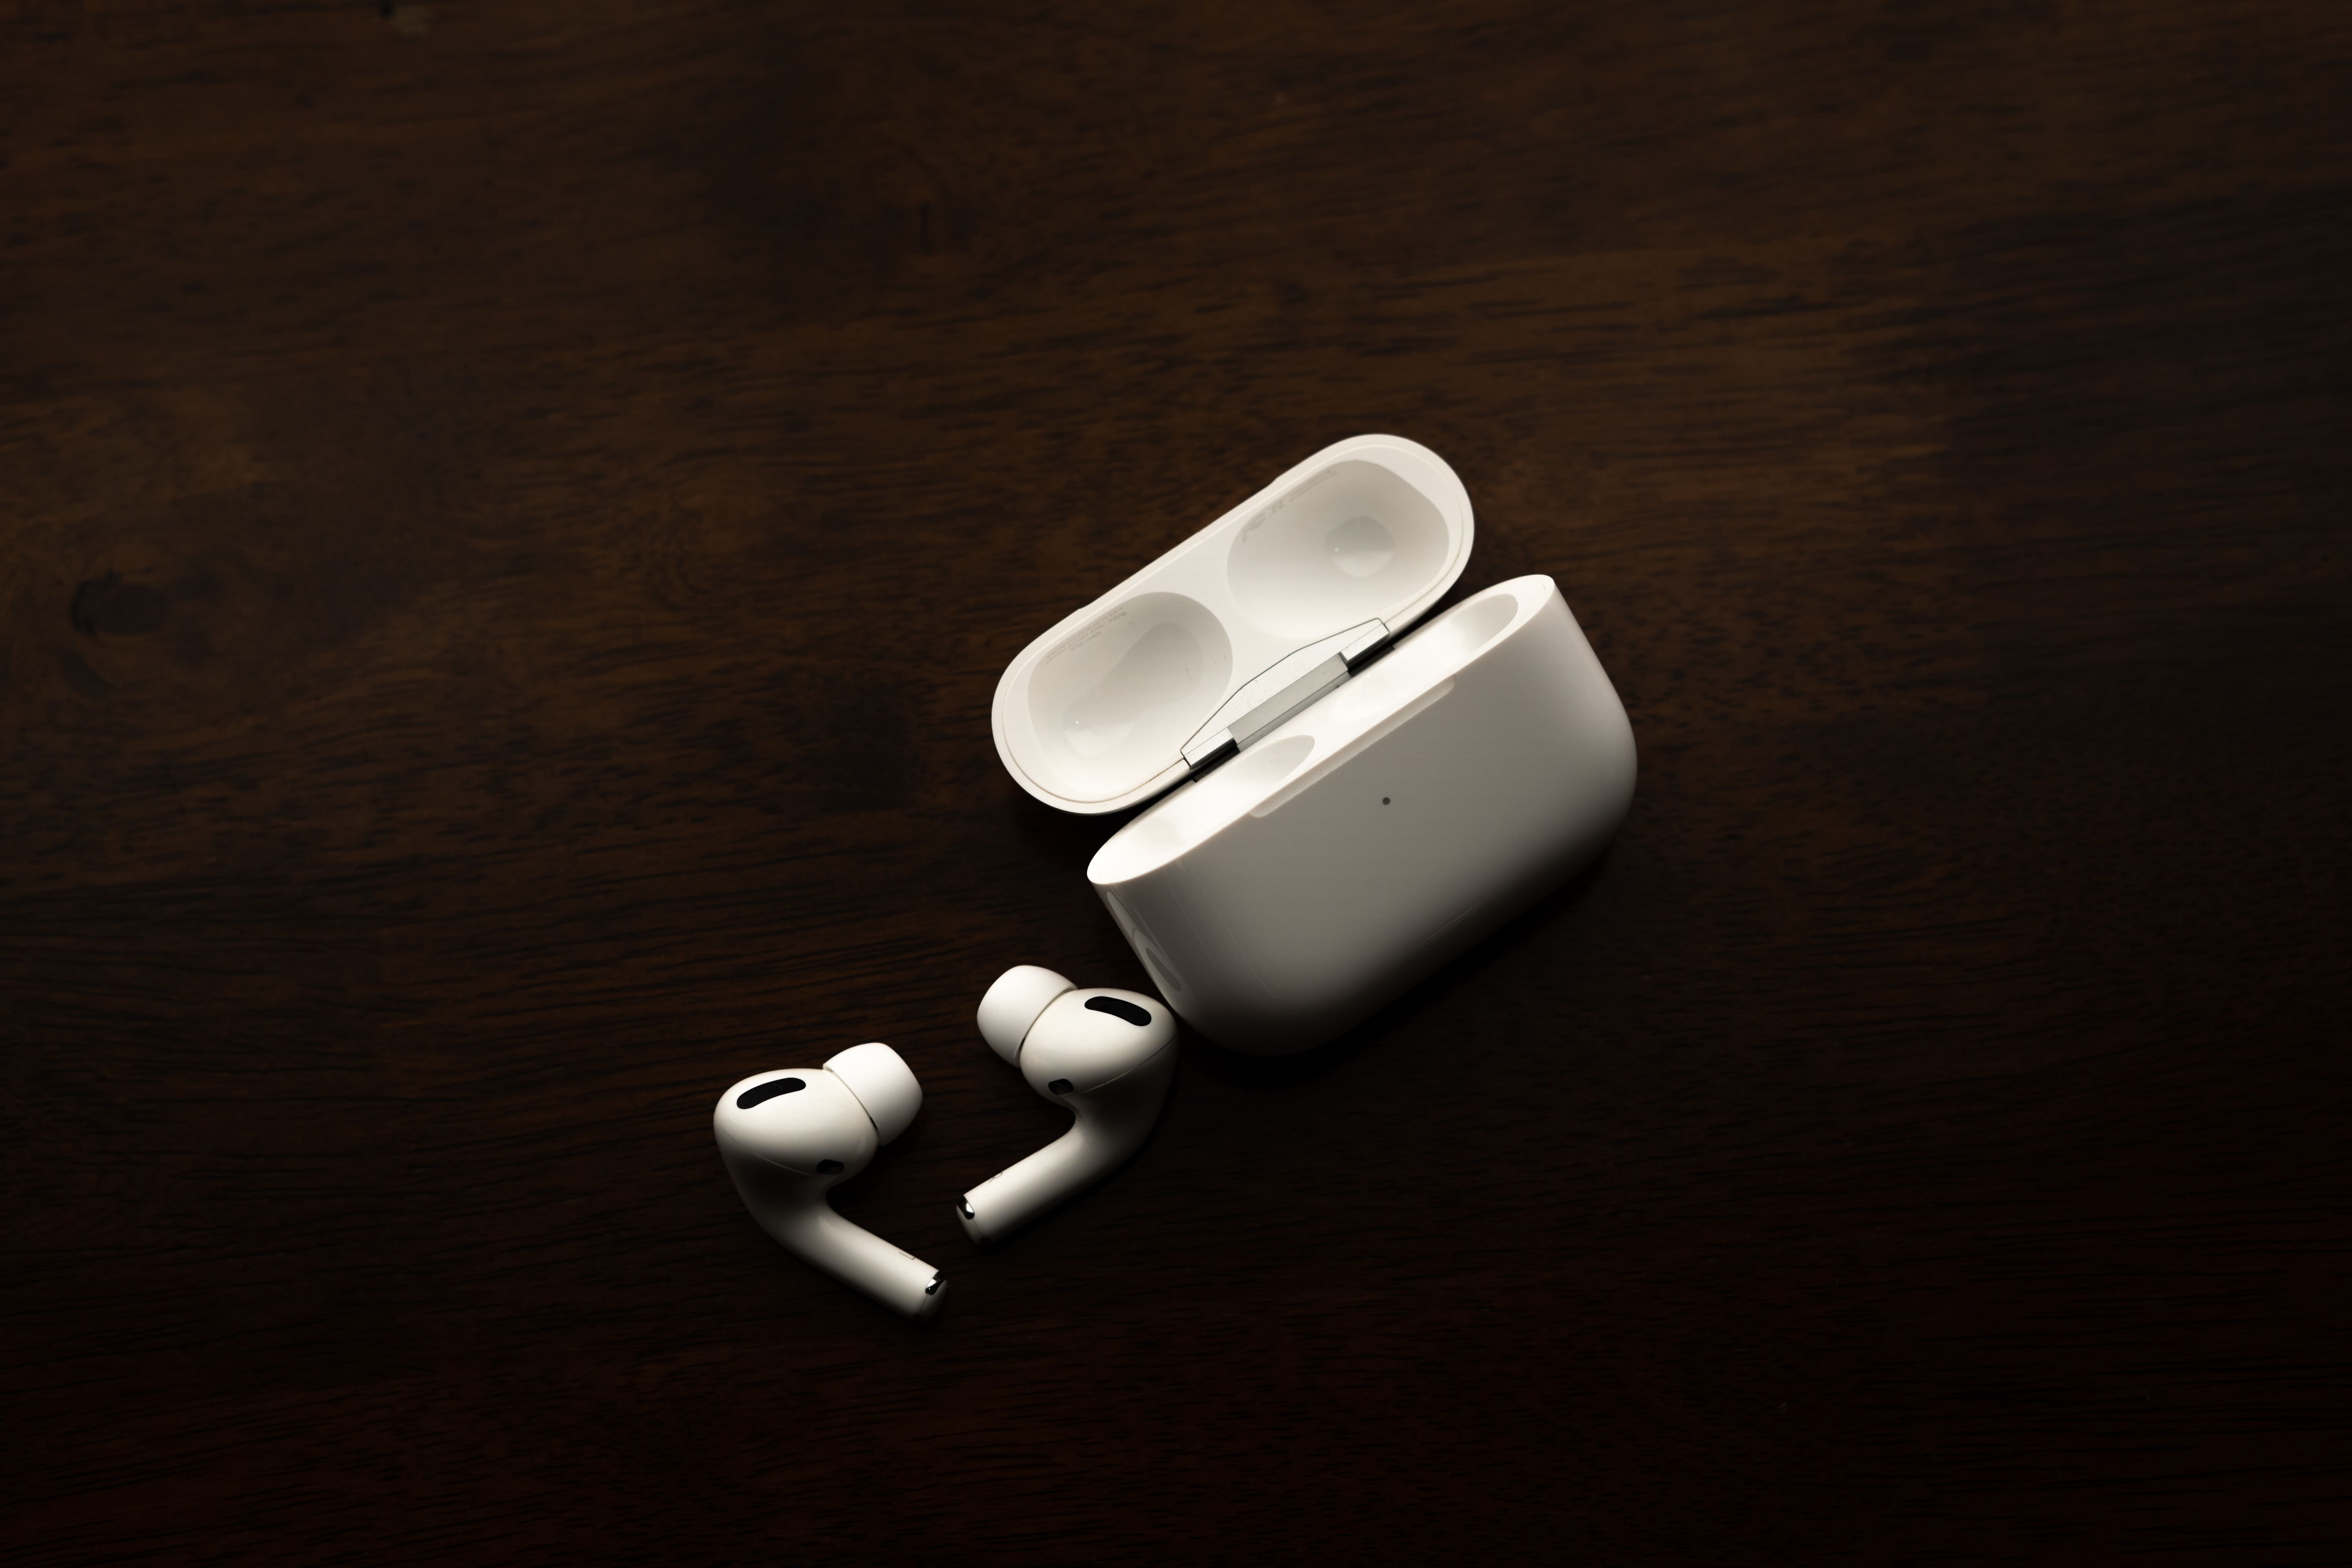 Airpods pro шумят